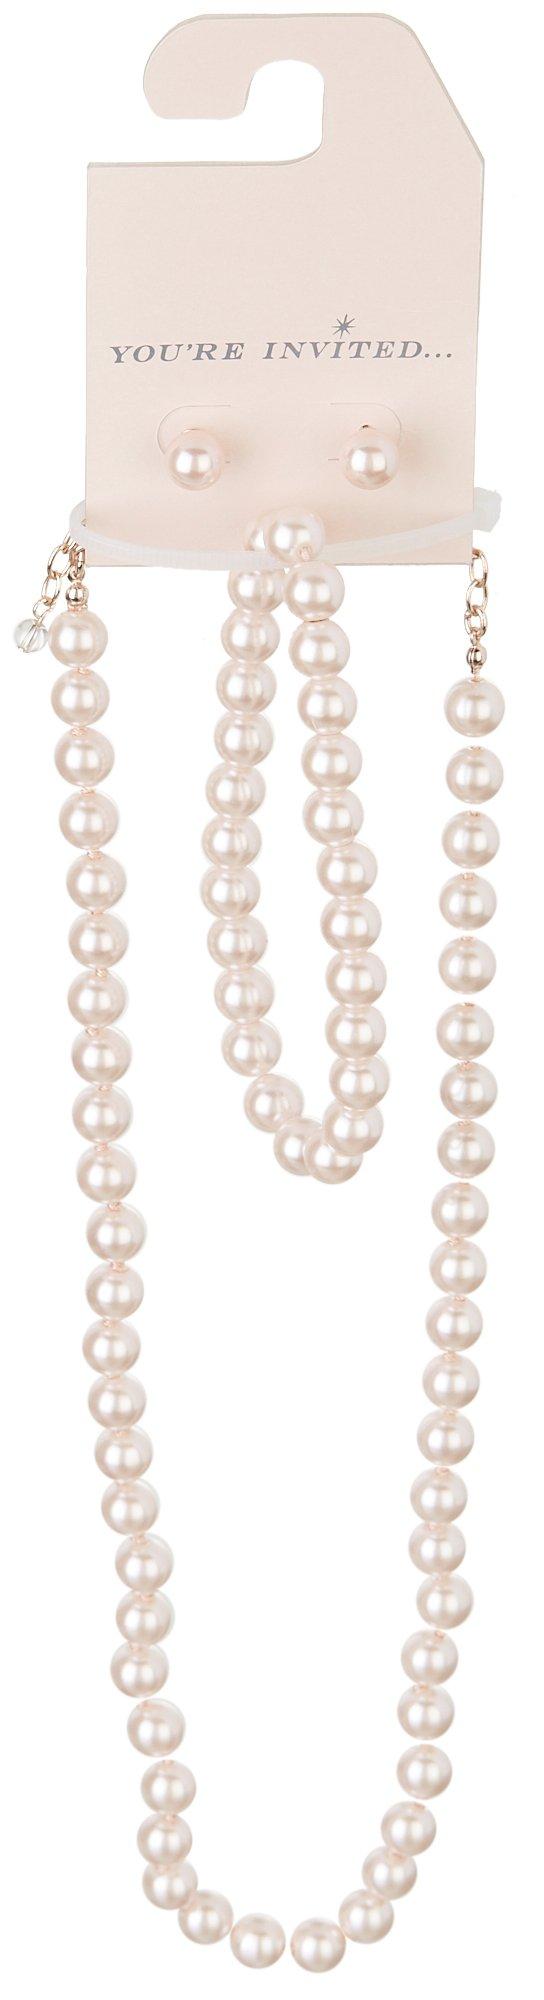 You're Invited 3-Pc. Pearl Necklace Bracelet & Earrings Set